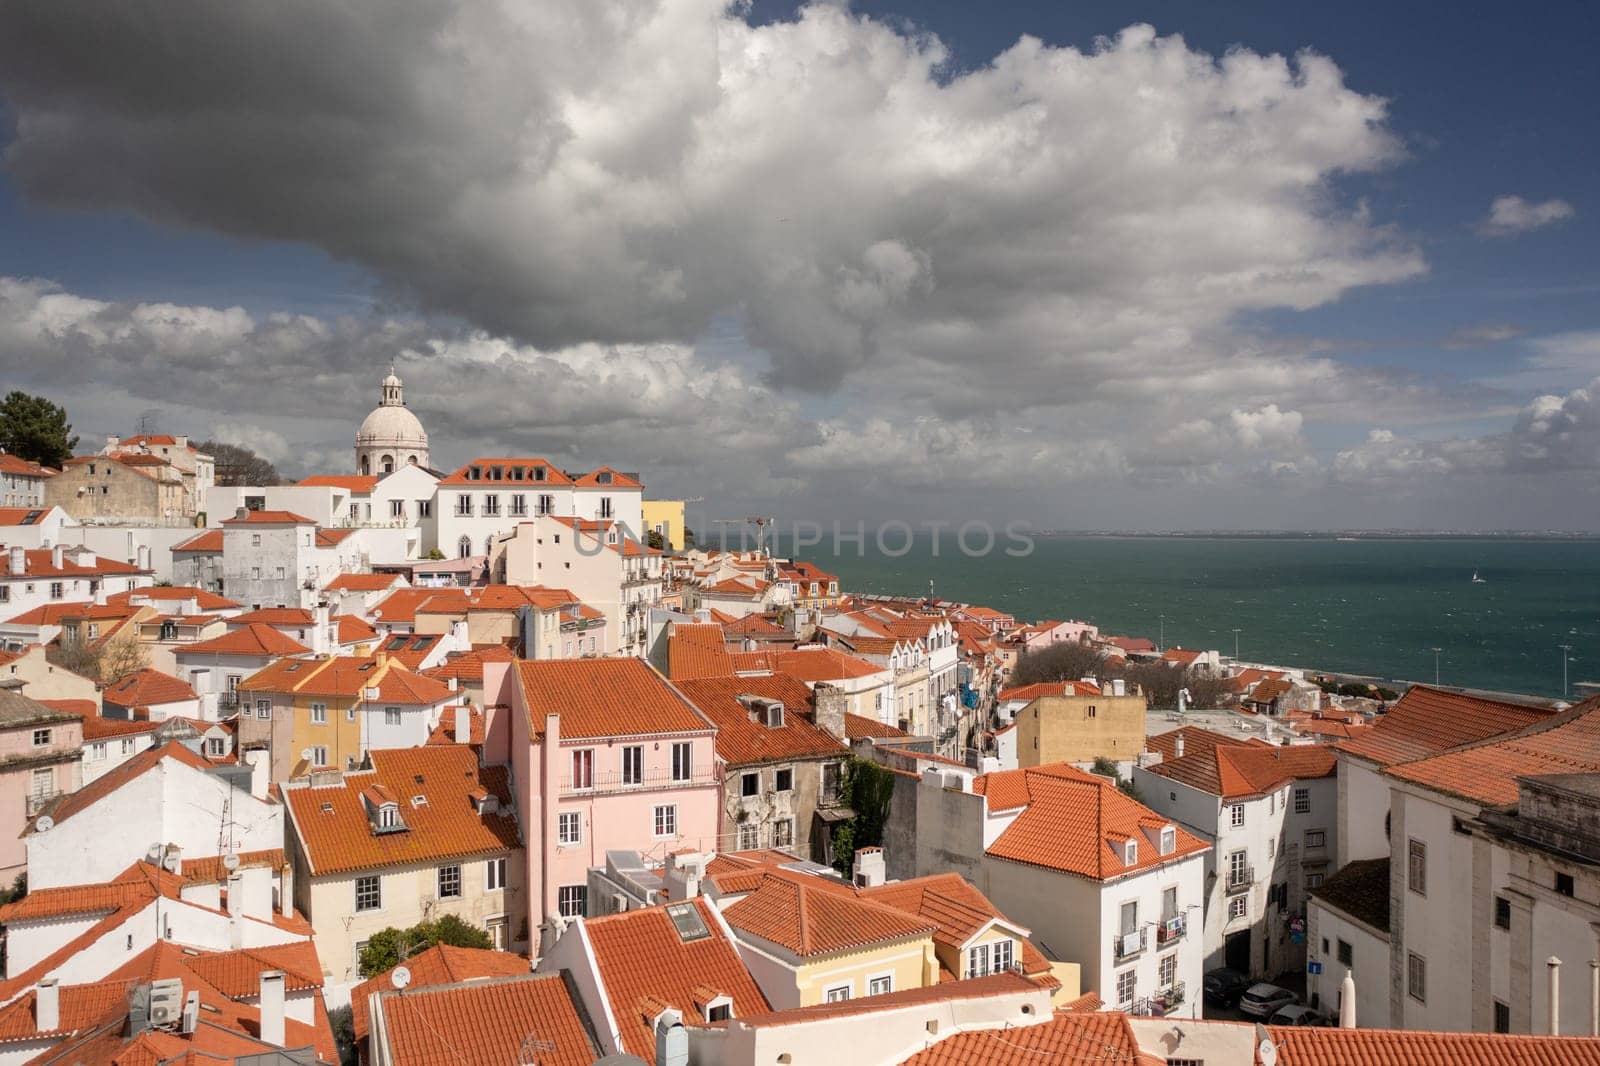 Aerial view of the Alfama, old part of Lisbon, Portugal. Church of Santa Engracia.